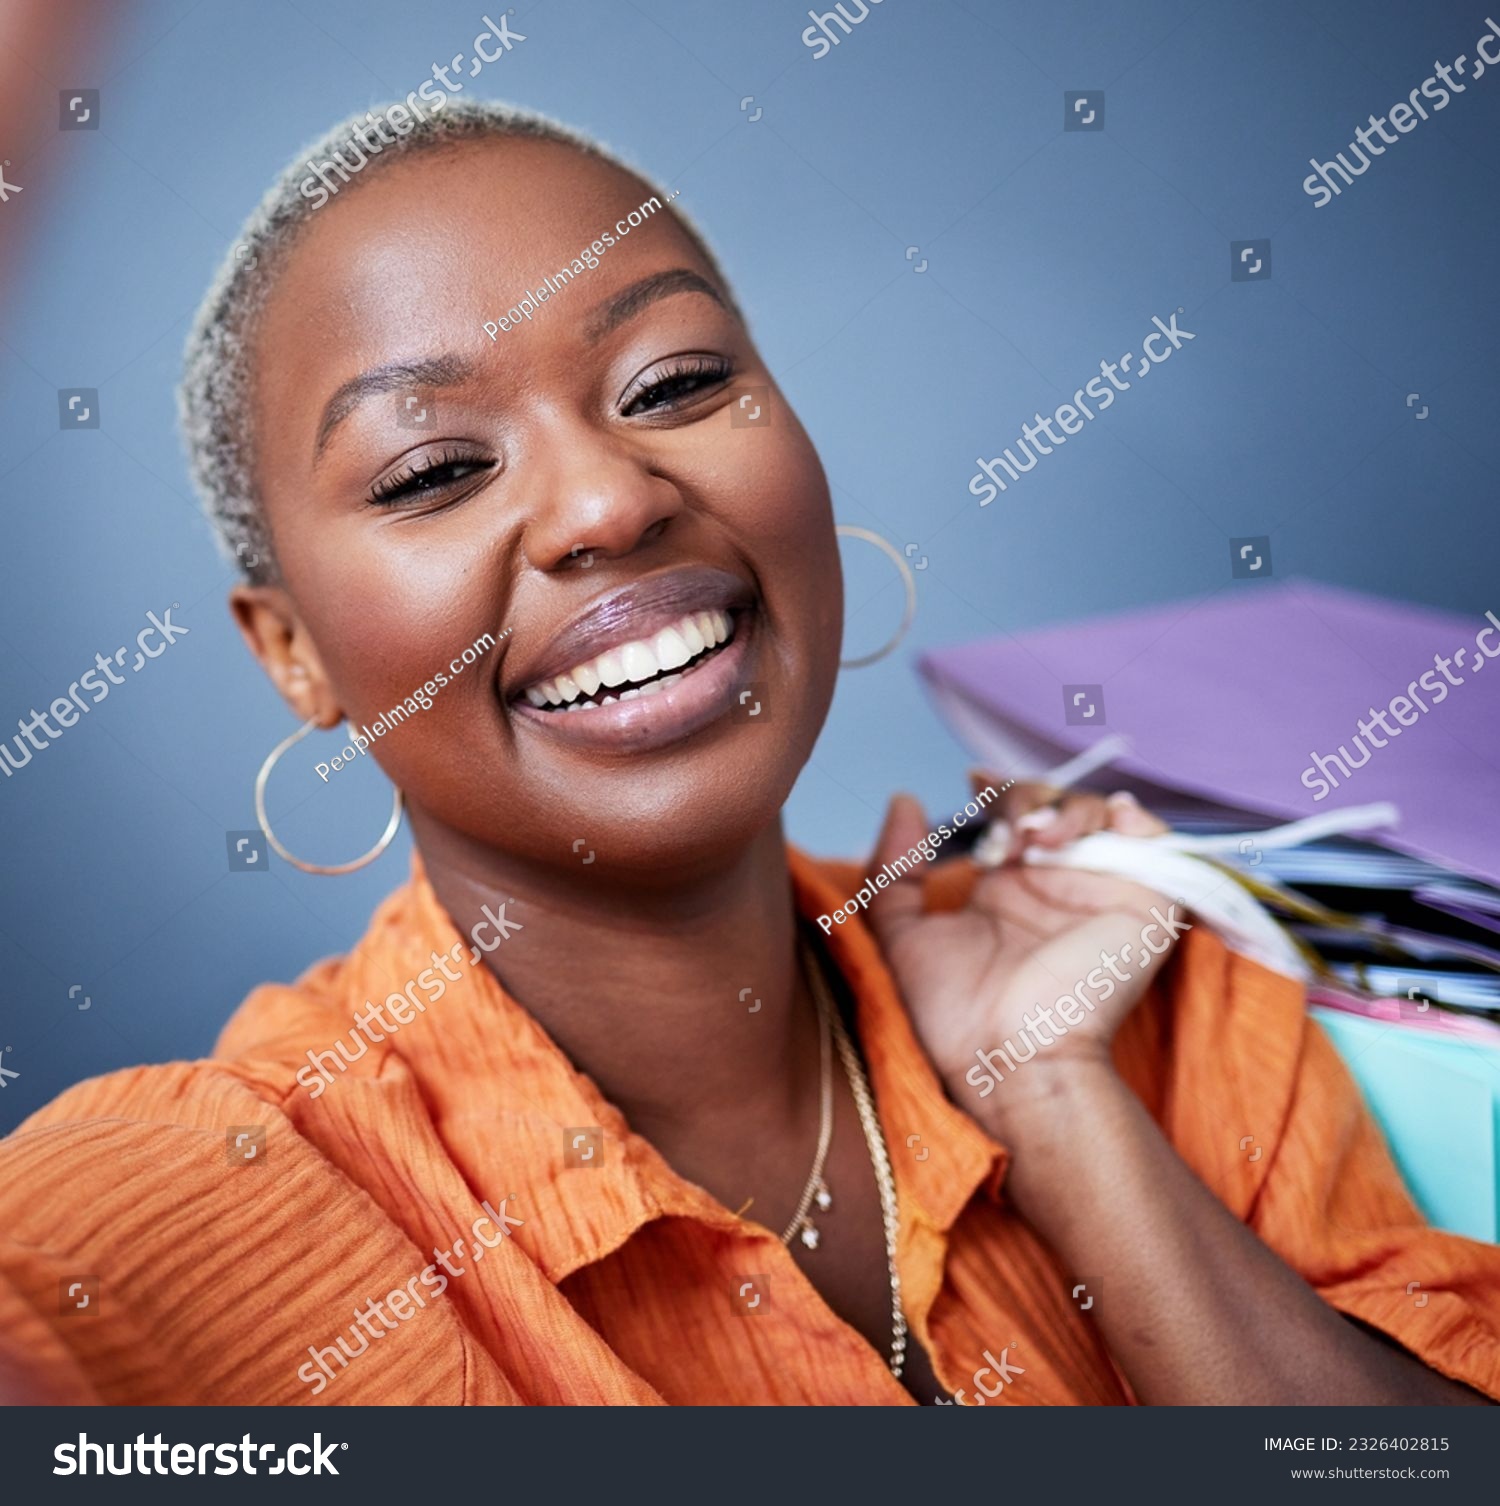 Selfie, smile and portrait of a woman with shopping bags in studio after sale, promotion or discount. Happy, excited and African female person taking picture after buying products by gray background. #2326402815